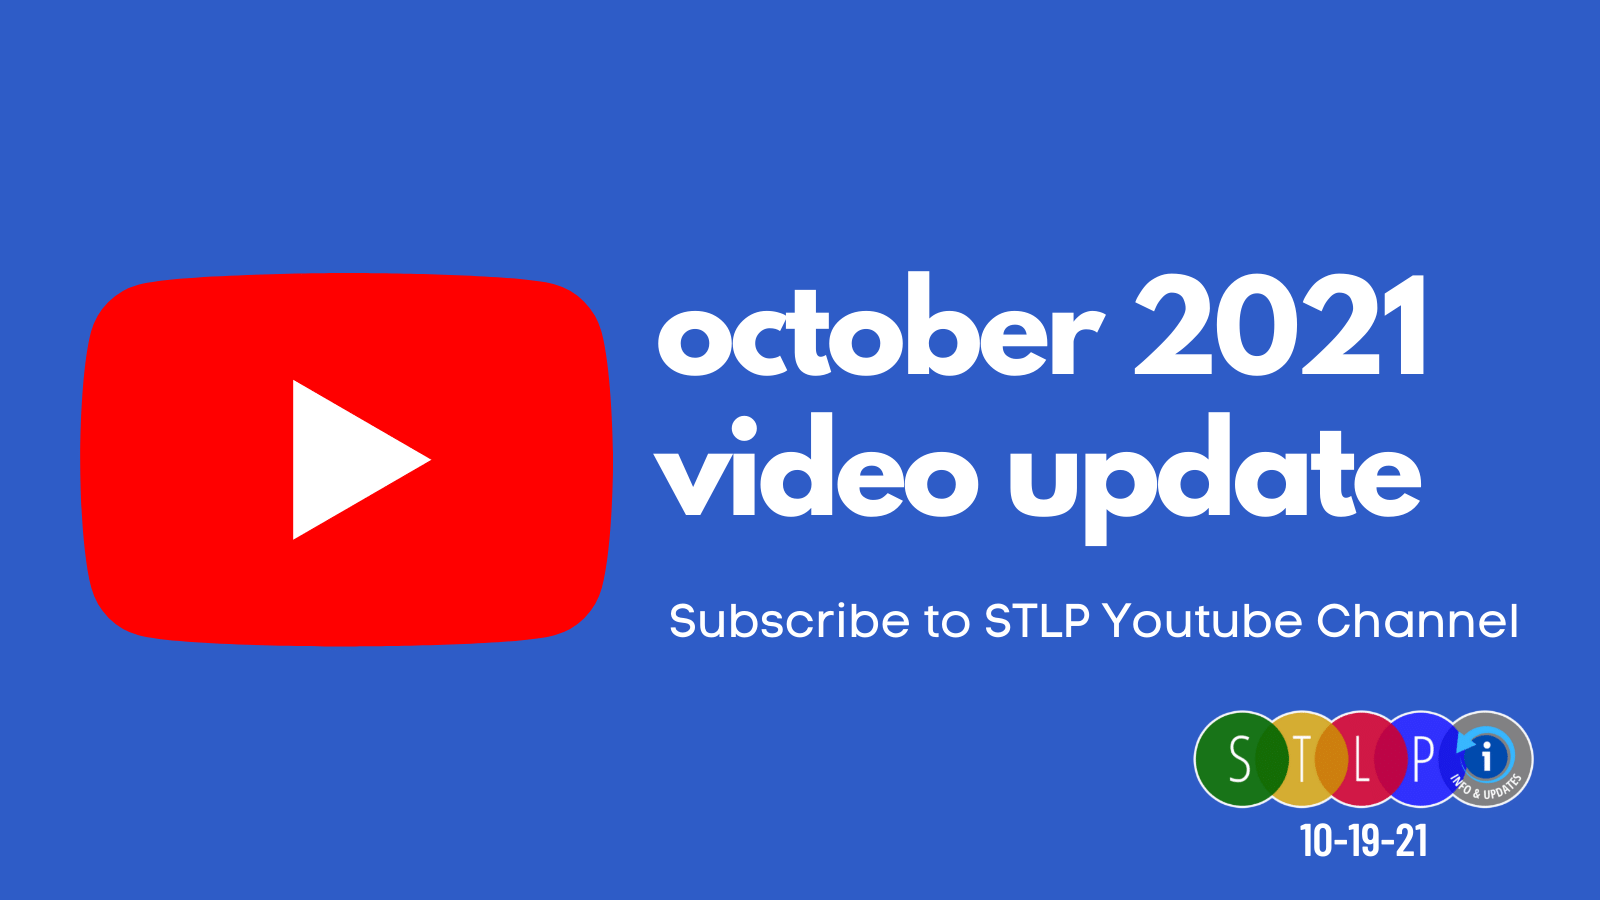 new uploaded News and Updates on the STLP YouTube channel